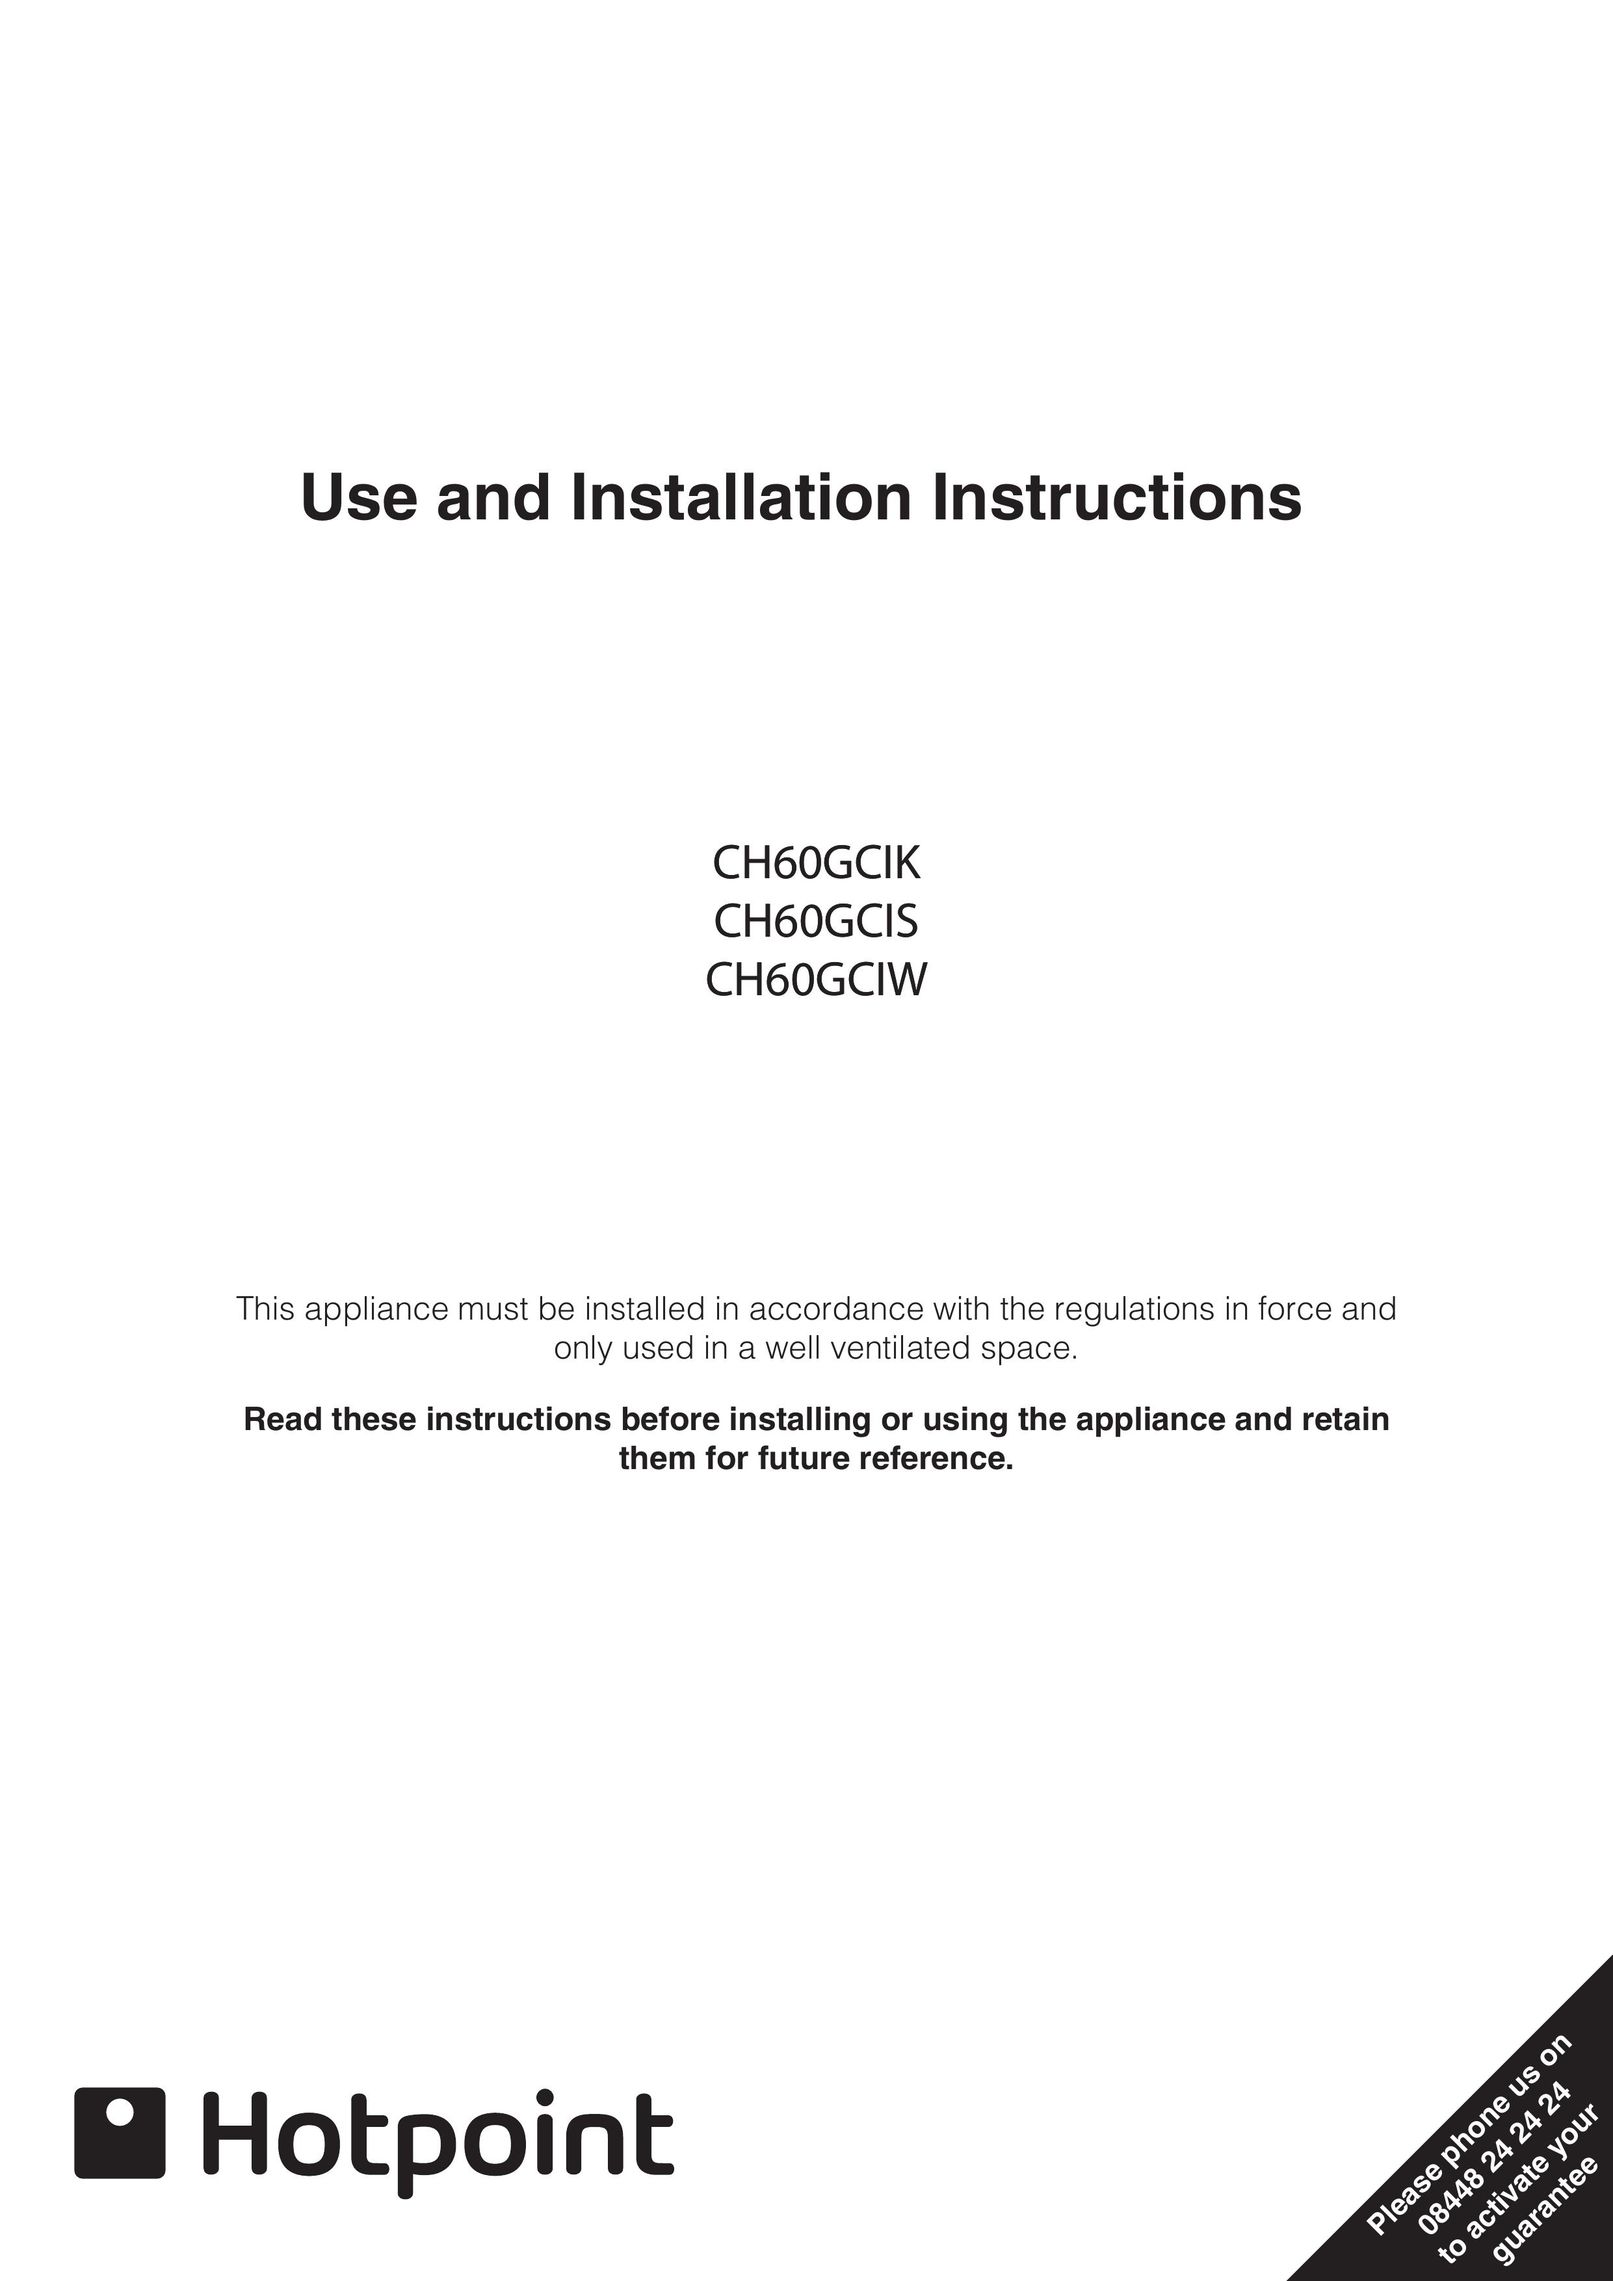 Hotpoint CH60GCIS Cooktop User Manual